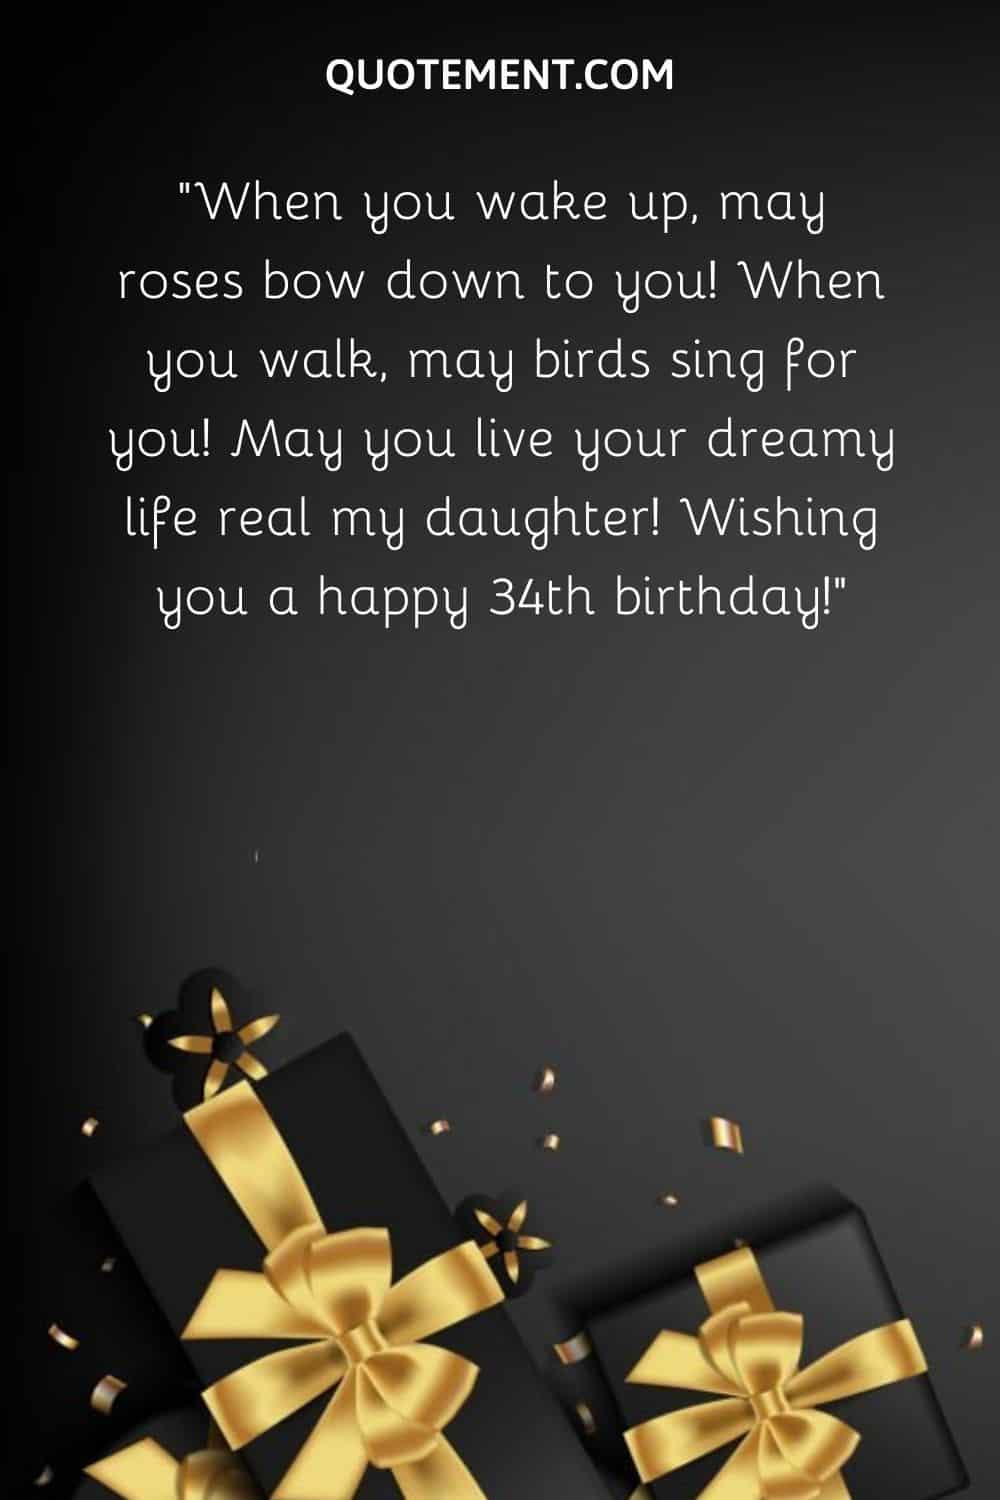 “When you wake up, may roses bow down to you! When you walk, may birds sing for you! May you live your dreamy life real my daughter! Wishing you a happy 34th birthday!”